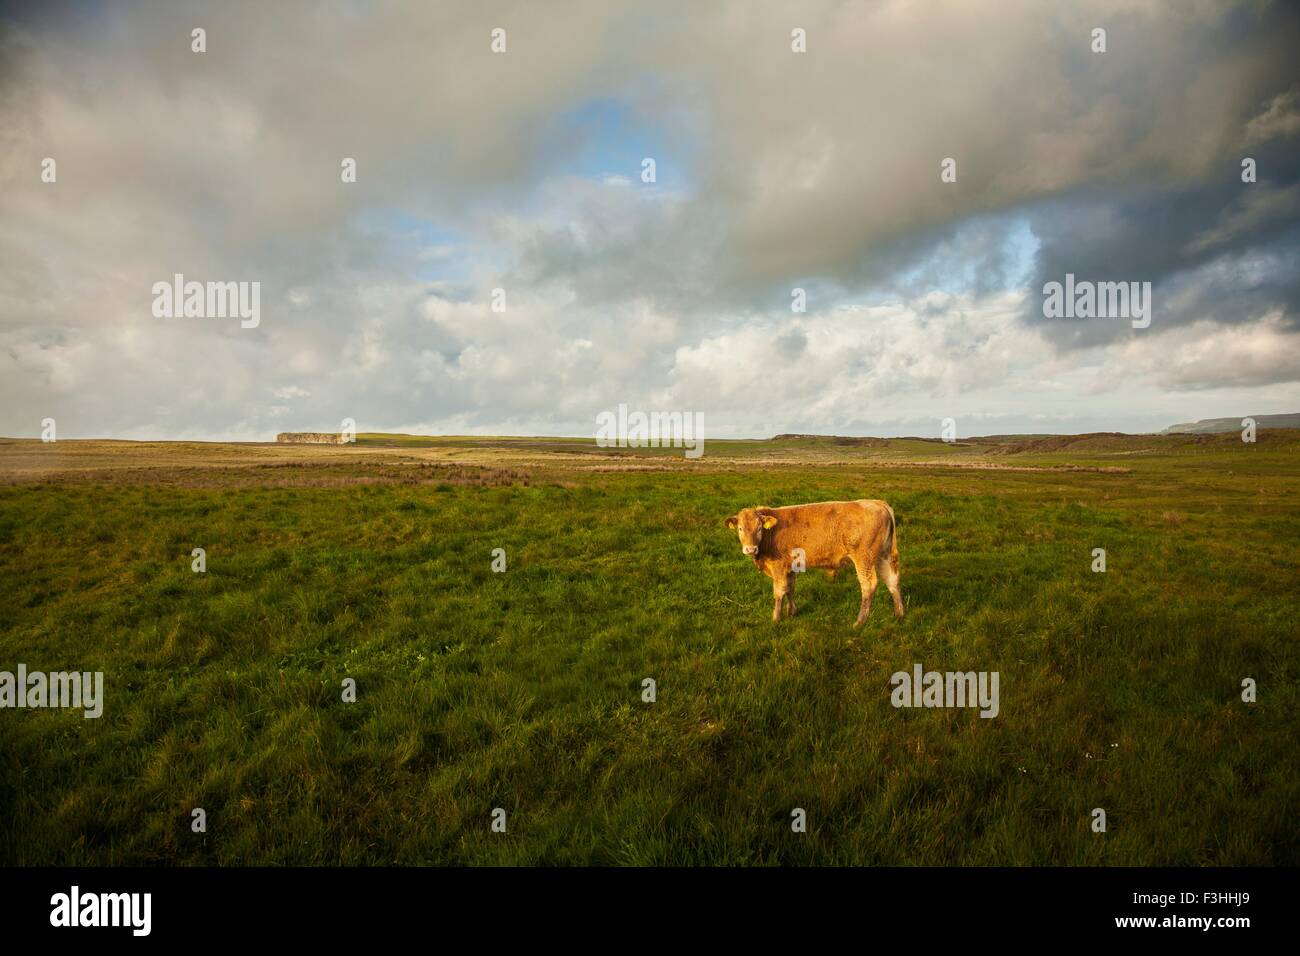 Cow in field, Giants Causeway, Bushmills, County Antrim, Northern Ireland, elevated view Stock Photo